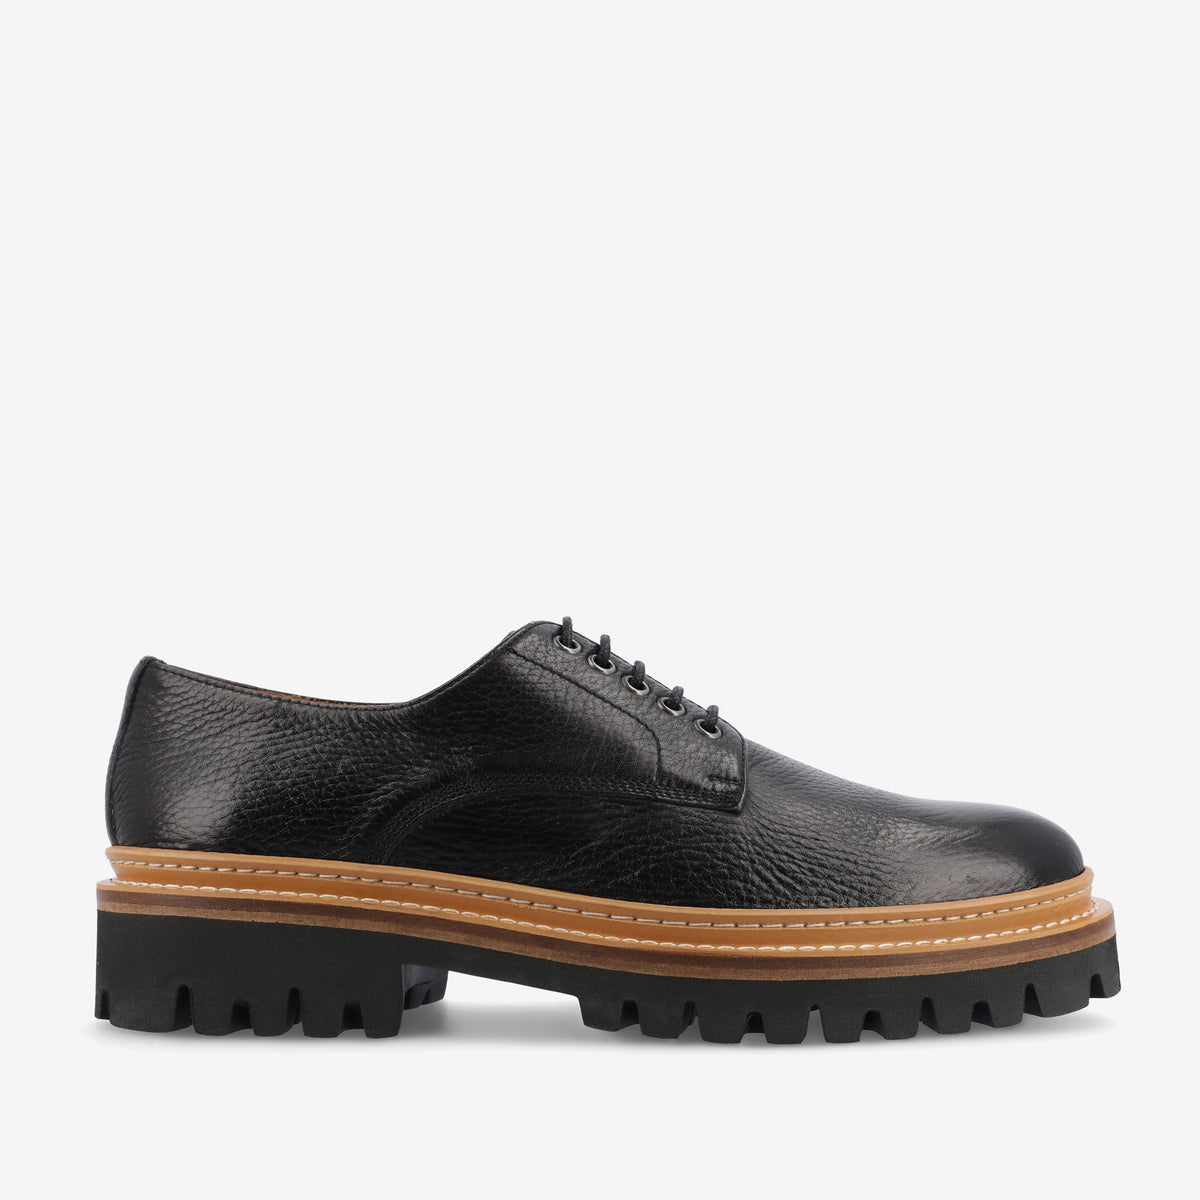 The Country Derby in Black (Last Chance, Final Sale)